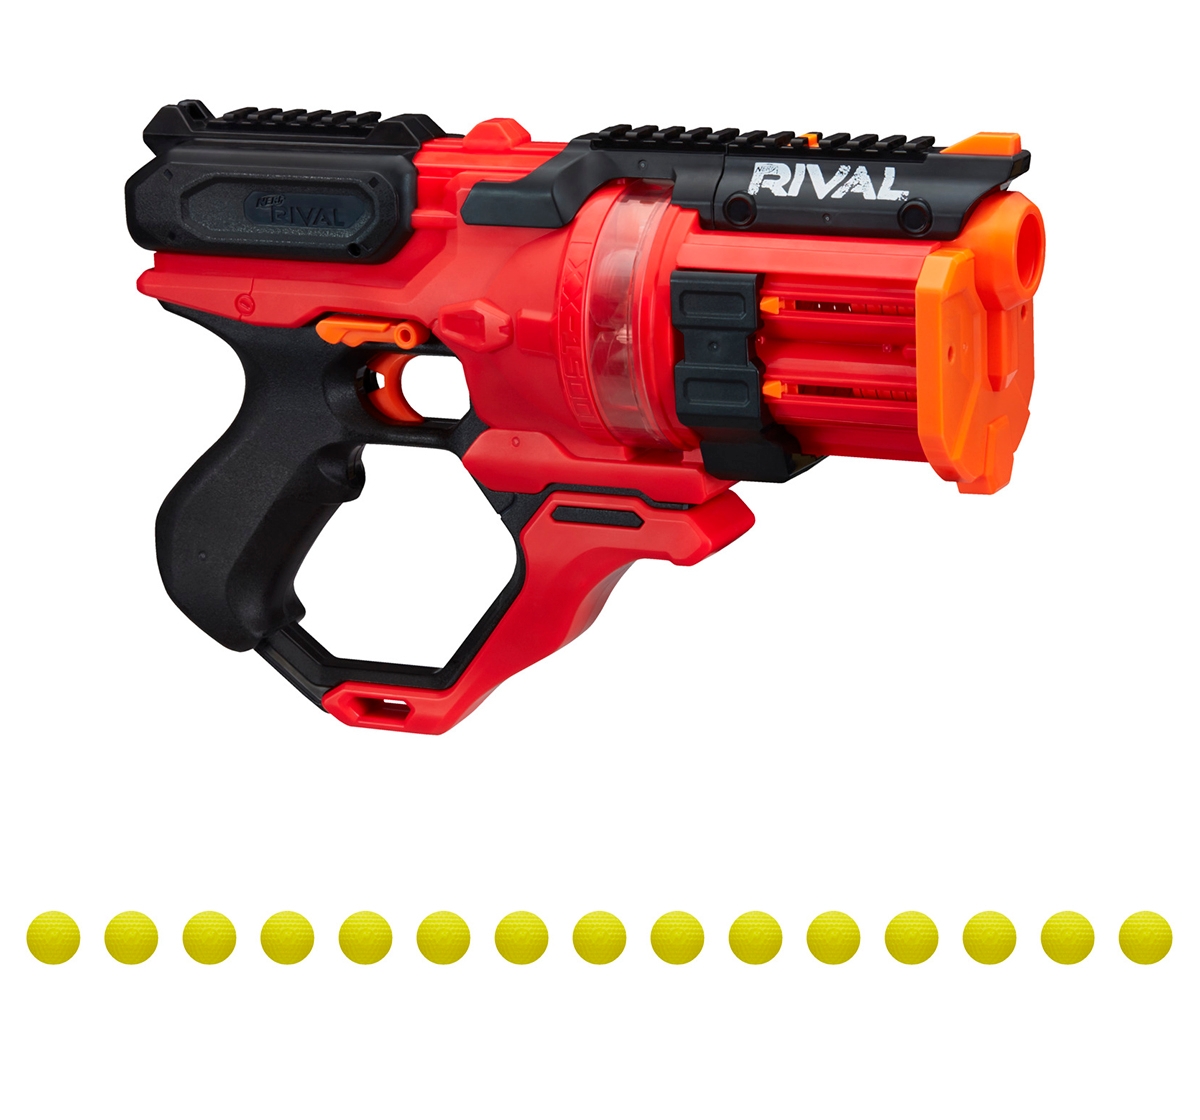 NERF Rival Roundhouse XX-1500 Blaster, Red, 14Y+